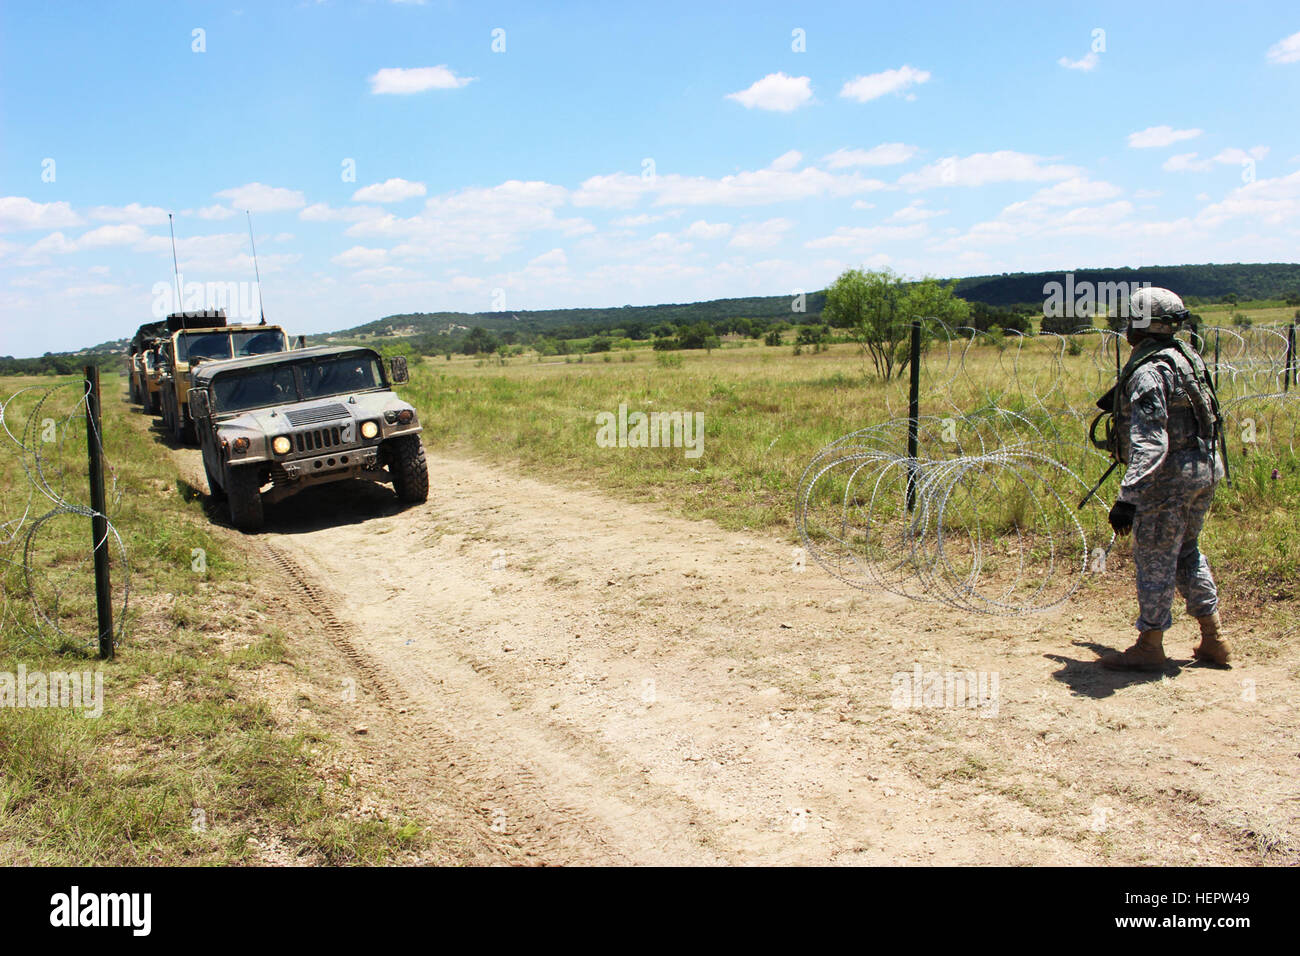 Soldiers of the 287th Engineer Company, 890th Engineer Battalion, set up an Entry Control Point at the Command Post of the Special Troops Battalion, 155th Armored Brigade Combat Team on June 7, 2016, at Fort Hood, Texas. The 287th En. Co. is an enabler unit for the 155th Armored Brigade Combat Team’s Multi-integrated Echelon Brigade Training Exercise. (Mississippi National Guard photos by Sgt. Brittany Johnson 155th Armored Brigade Combat Team Public Affairs/Released) Entry Control Point 160607-A-MA423-007 Stock Photo